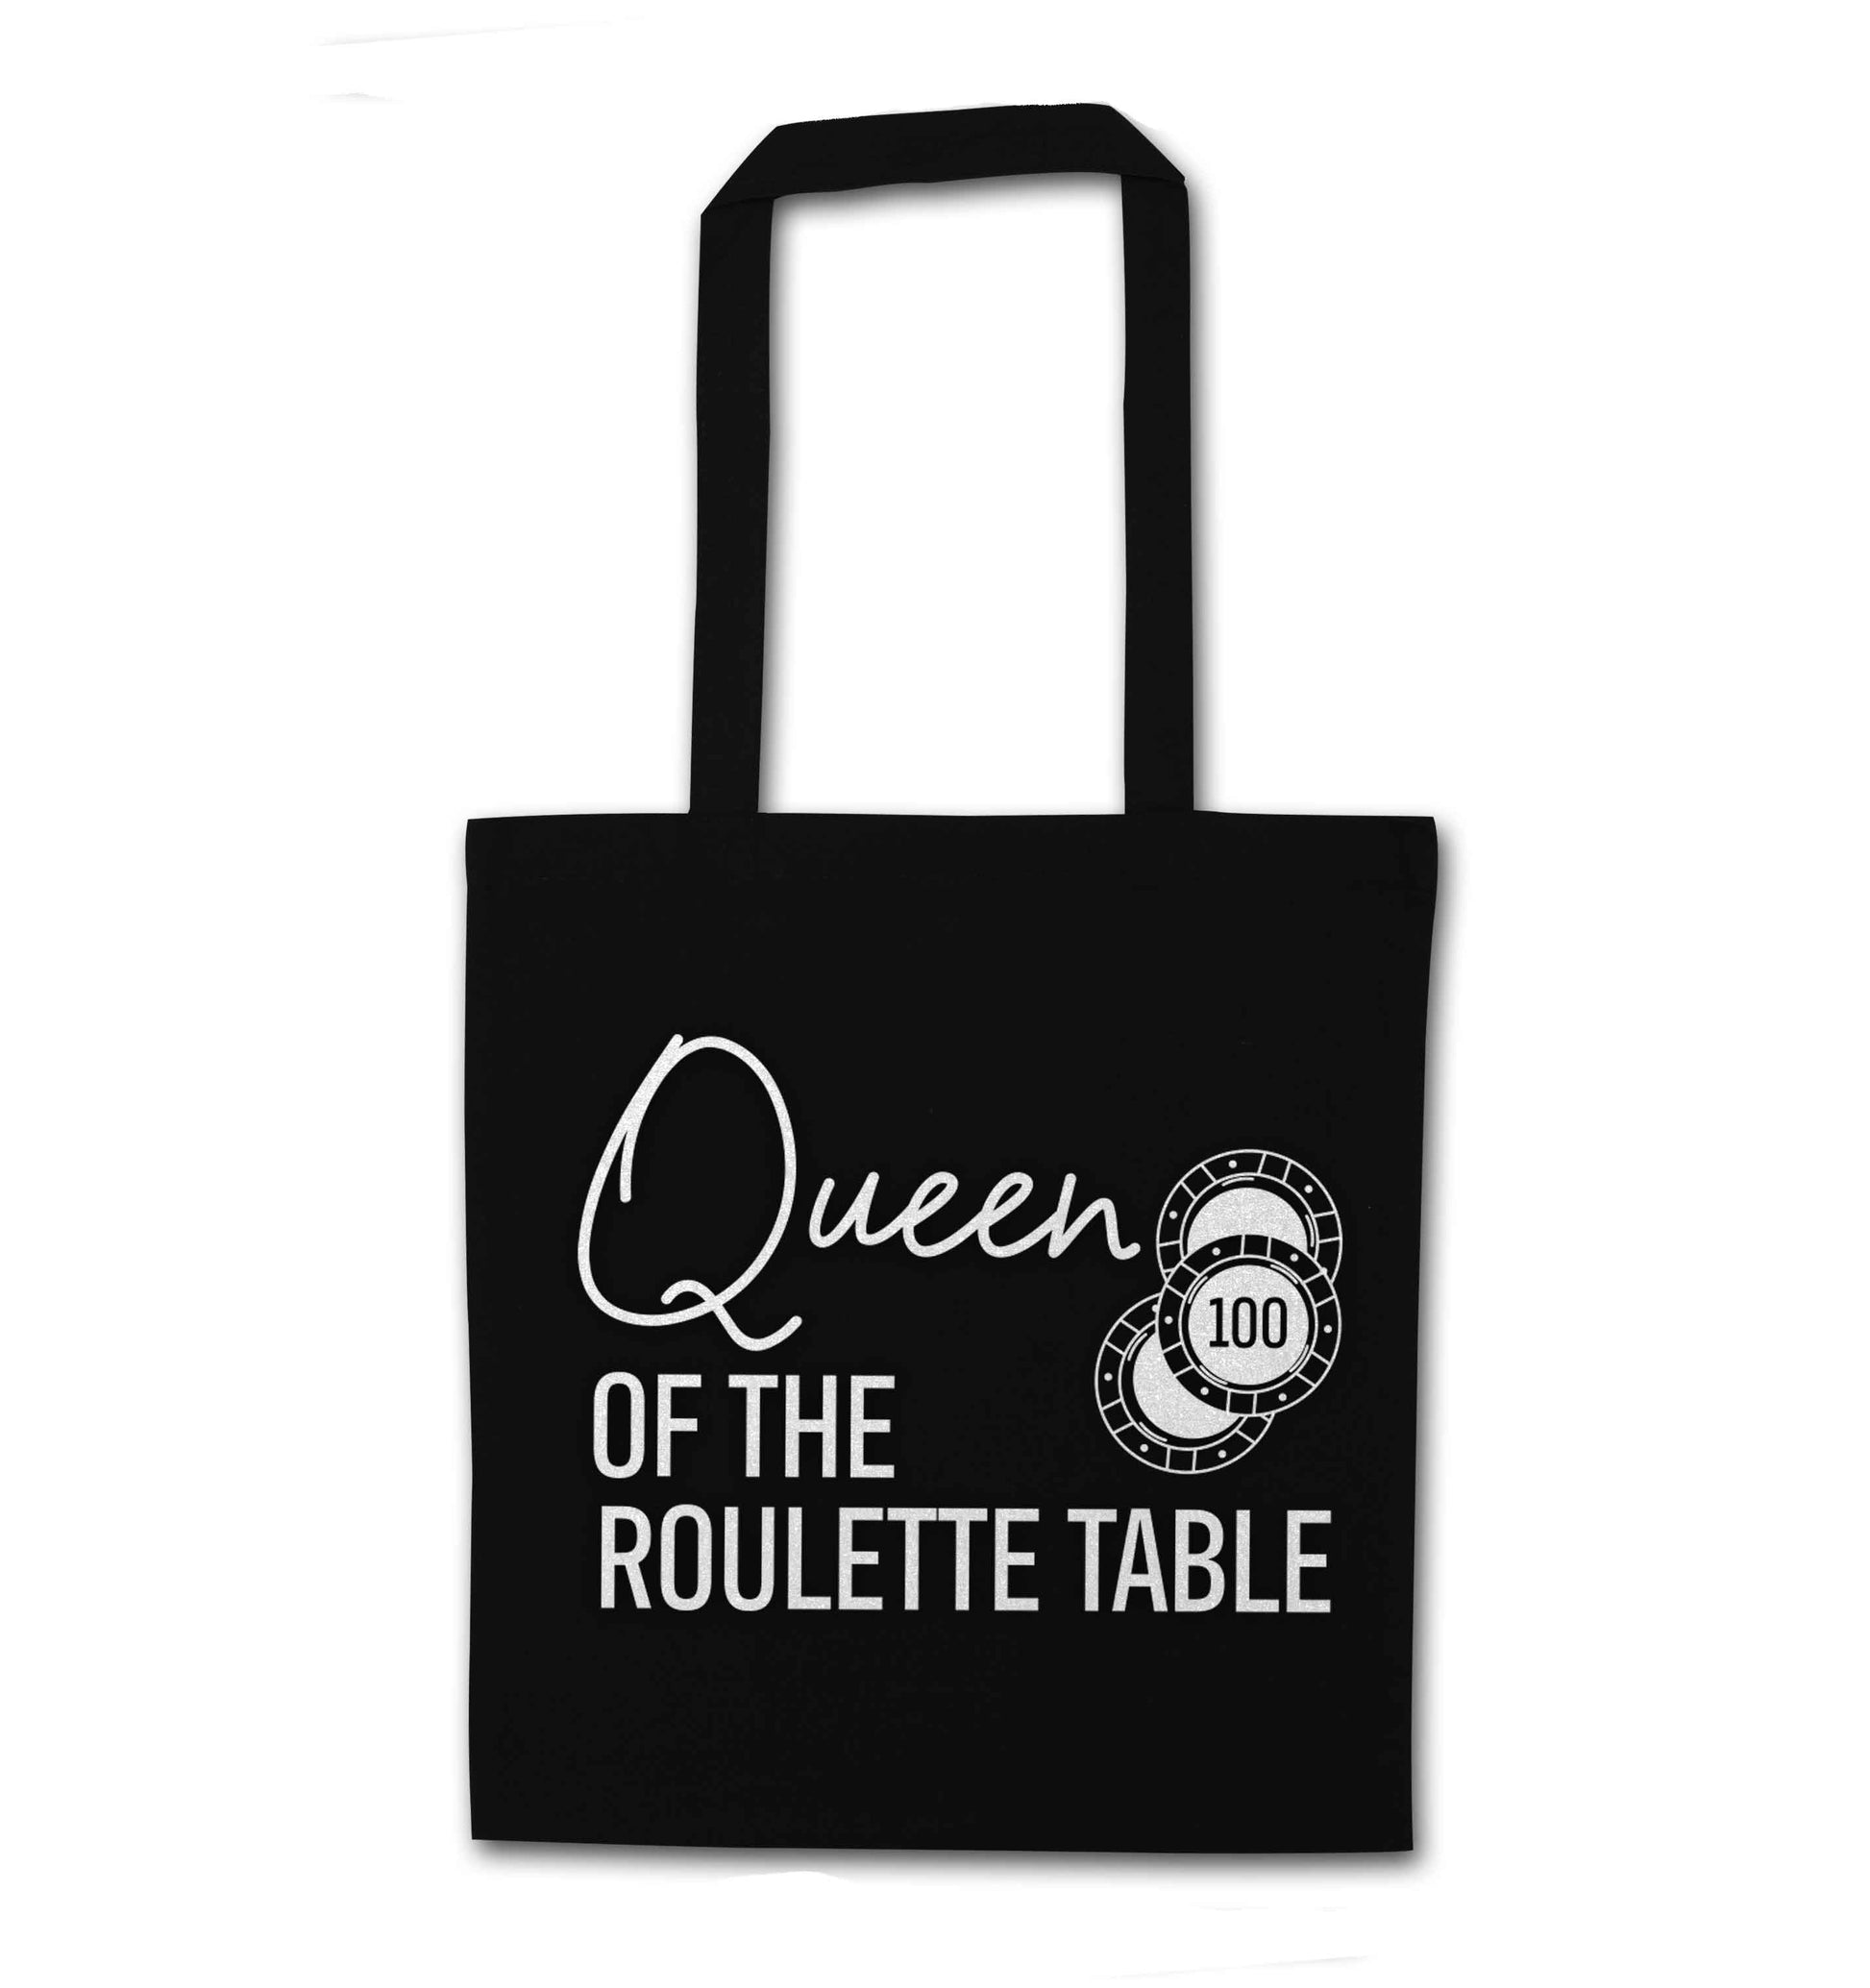 Queen of the roulette table black tote bag